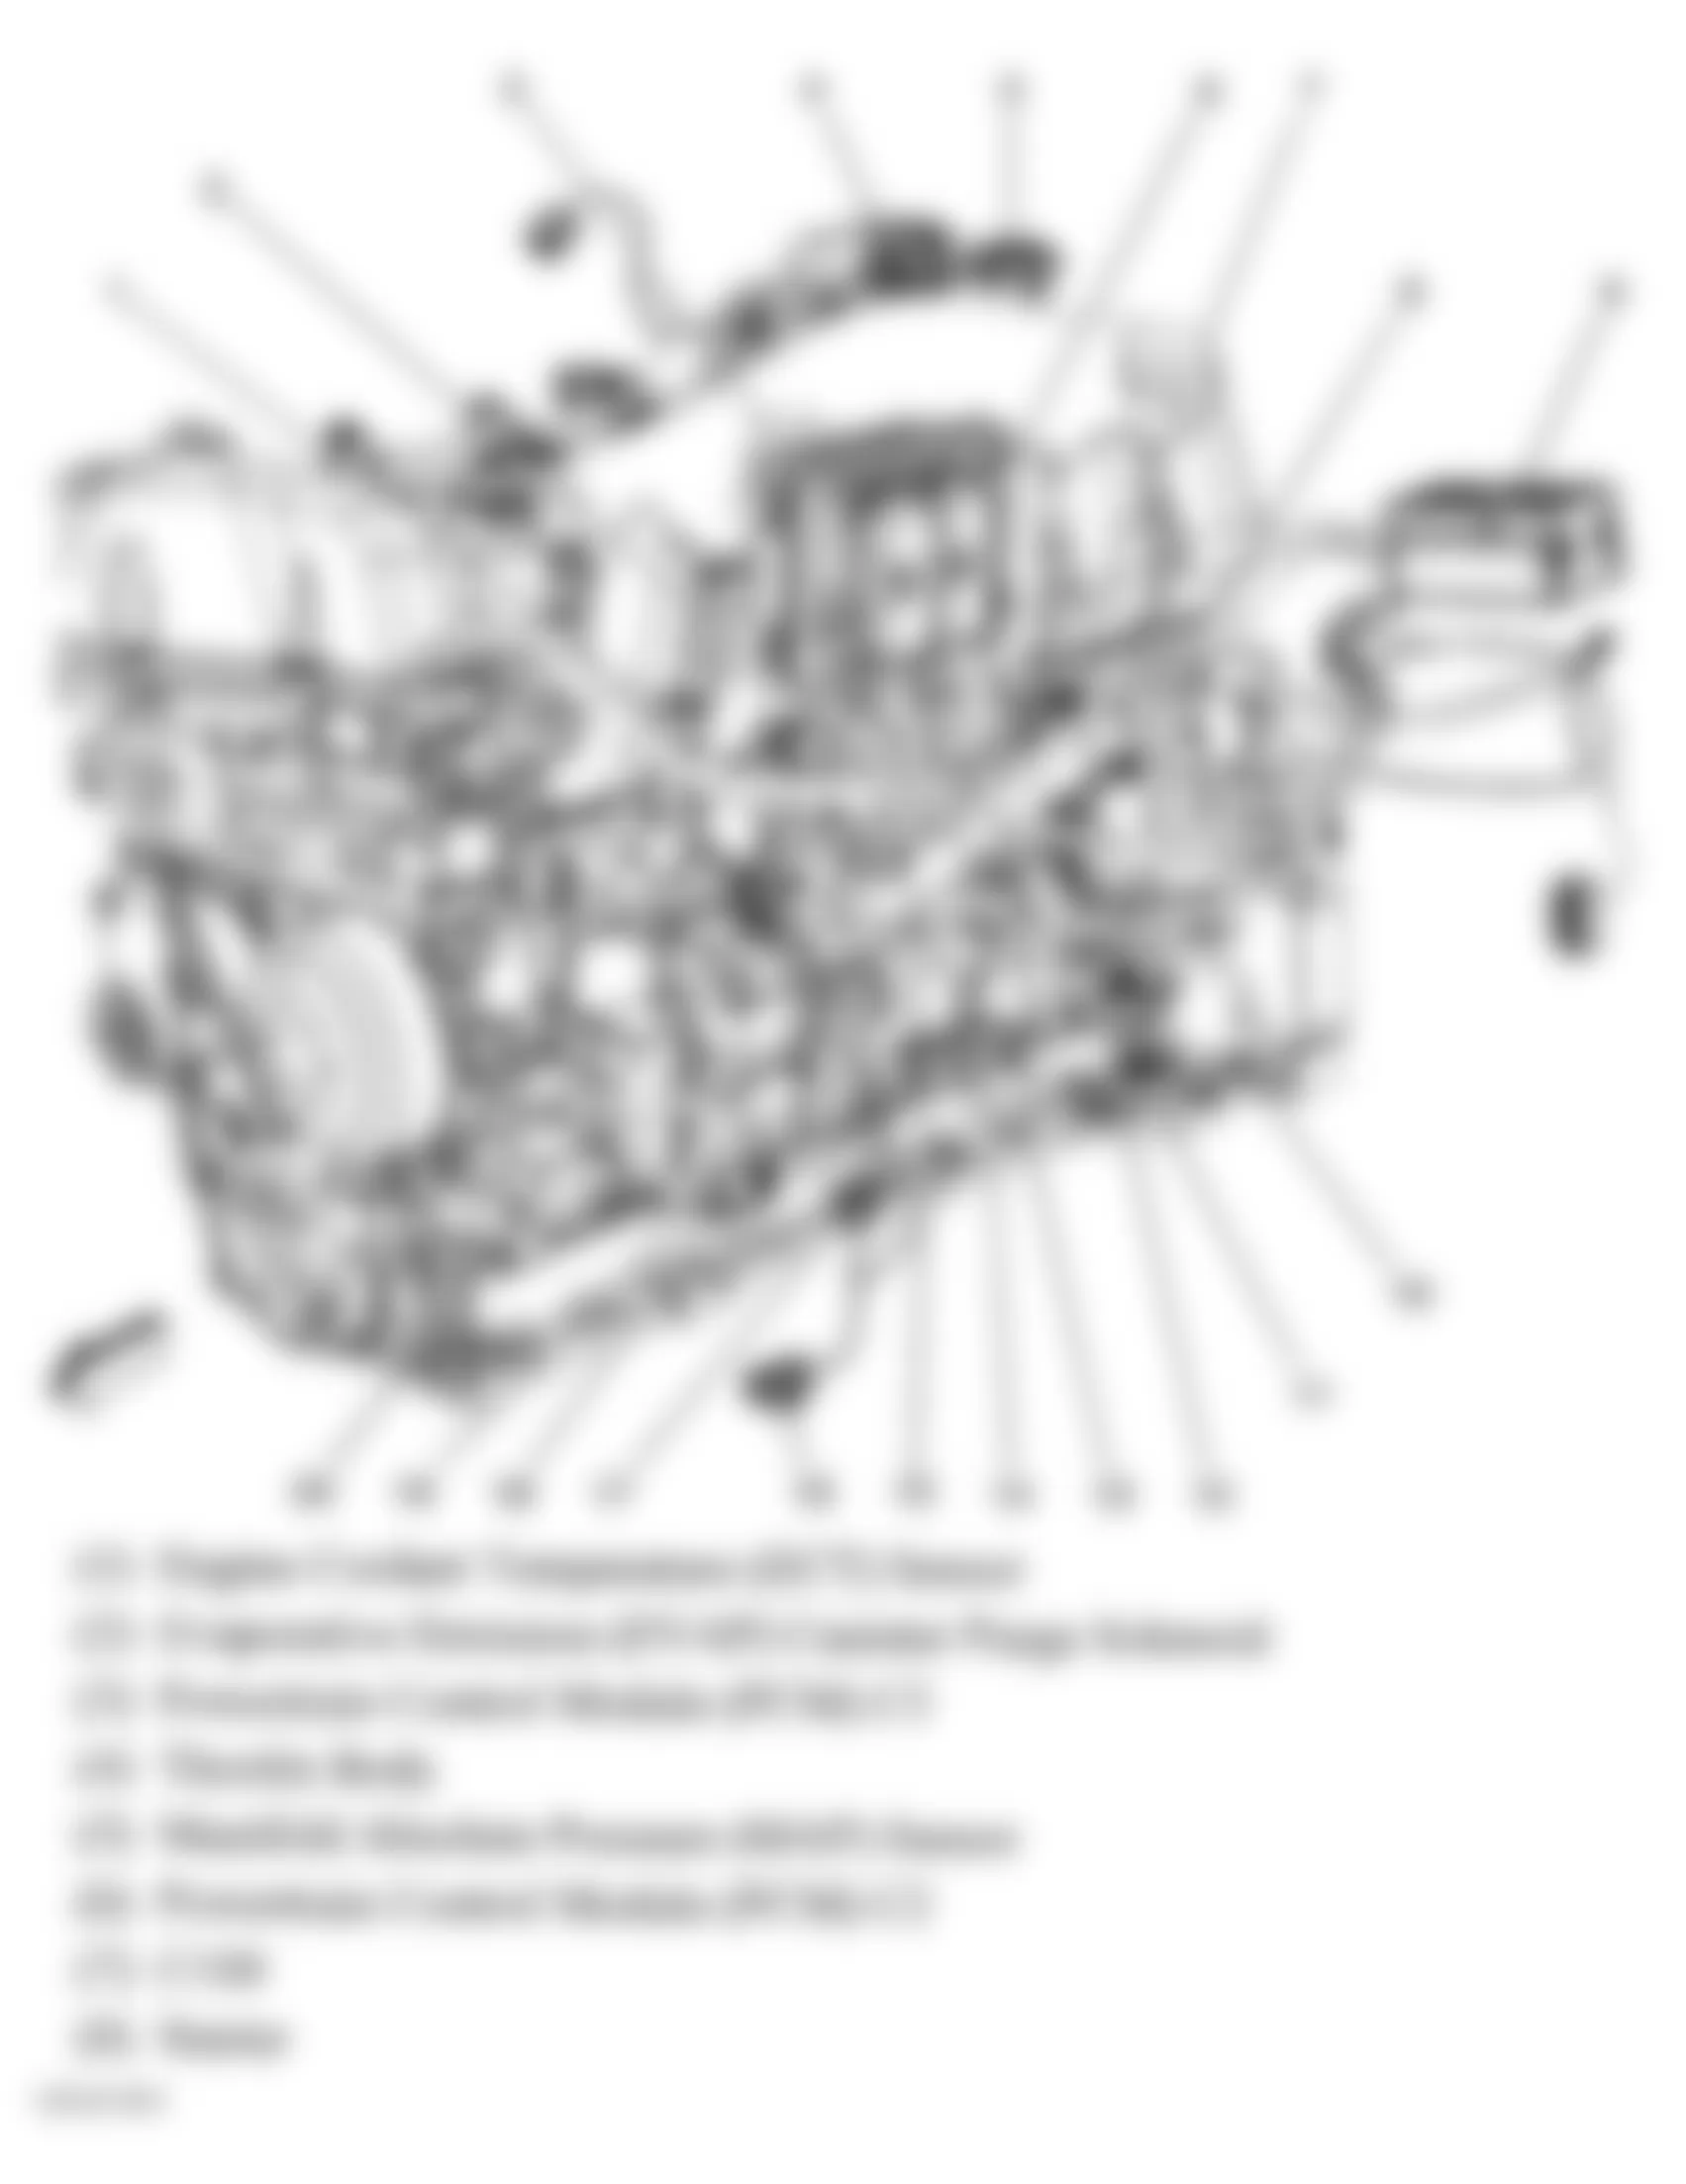 Buick Rainier 2006 - Component Locations -  Left Side Of Engine (4.2L) (1 Of 2)